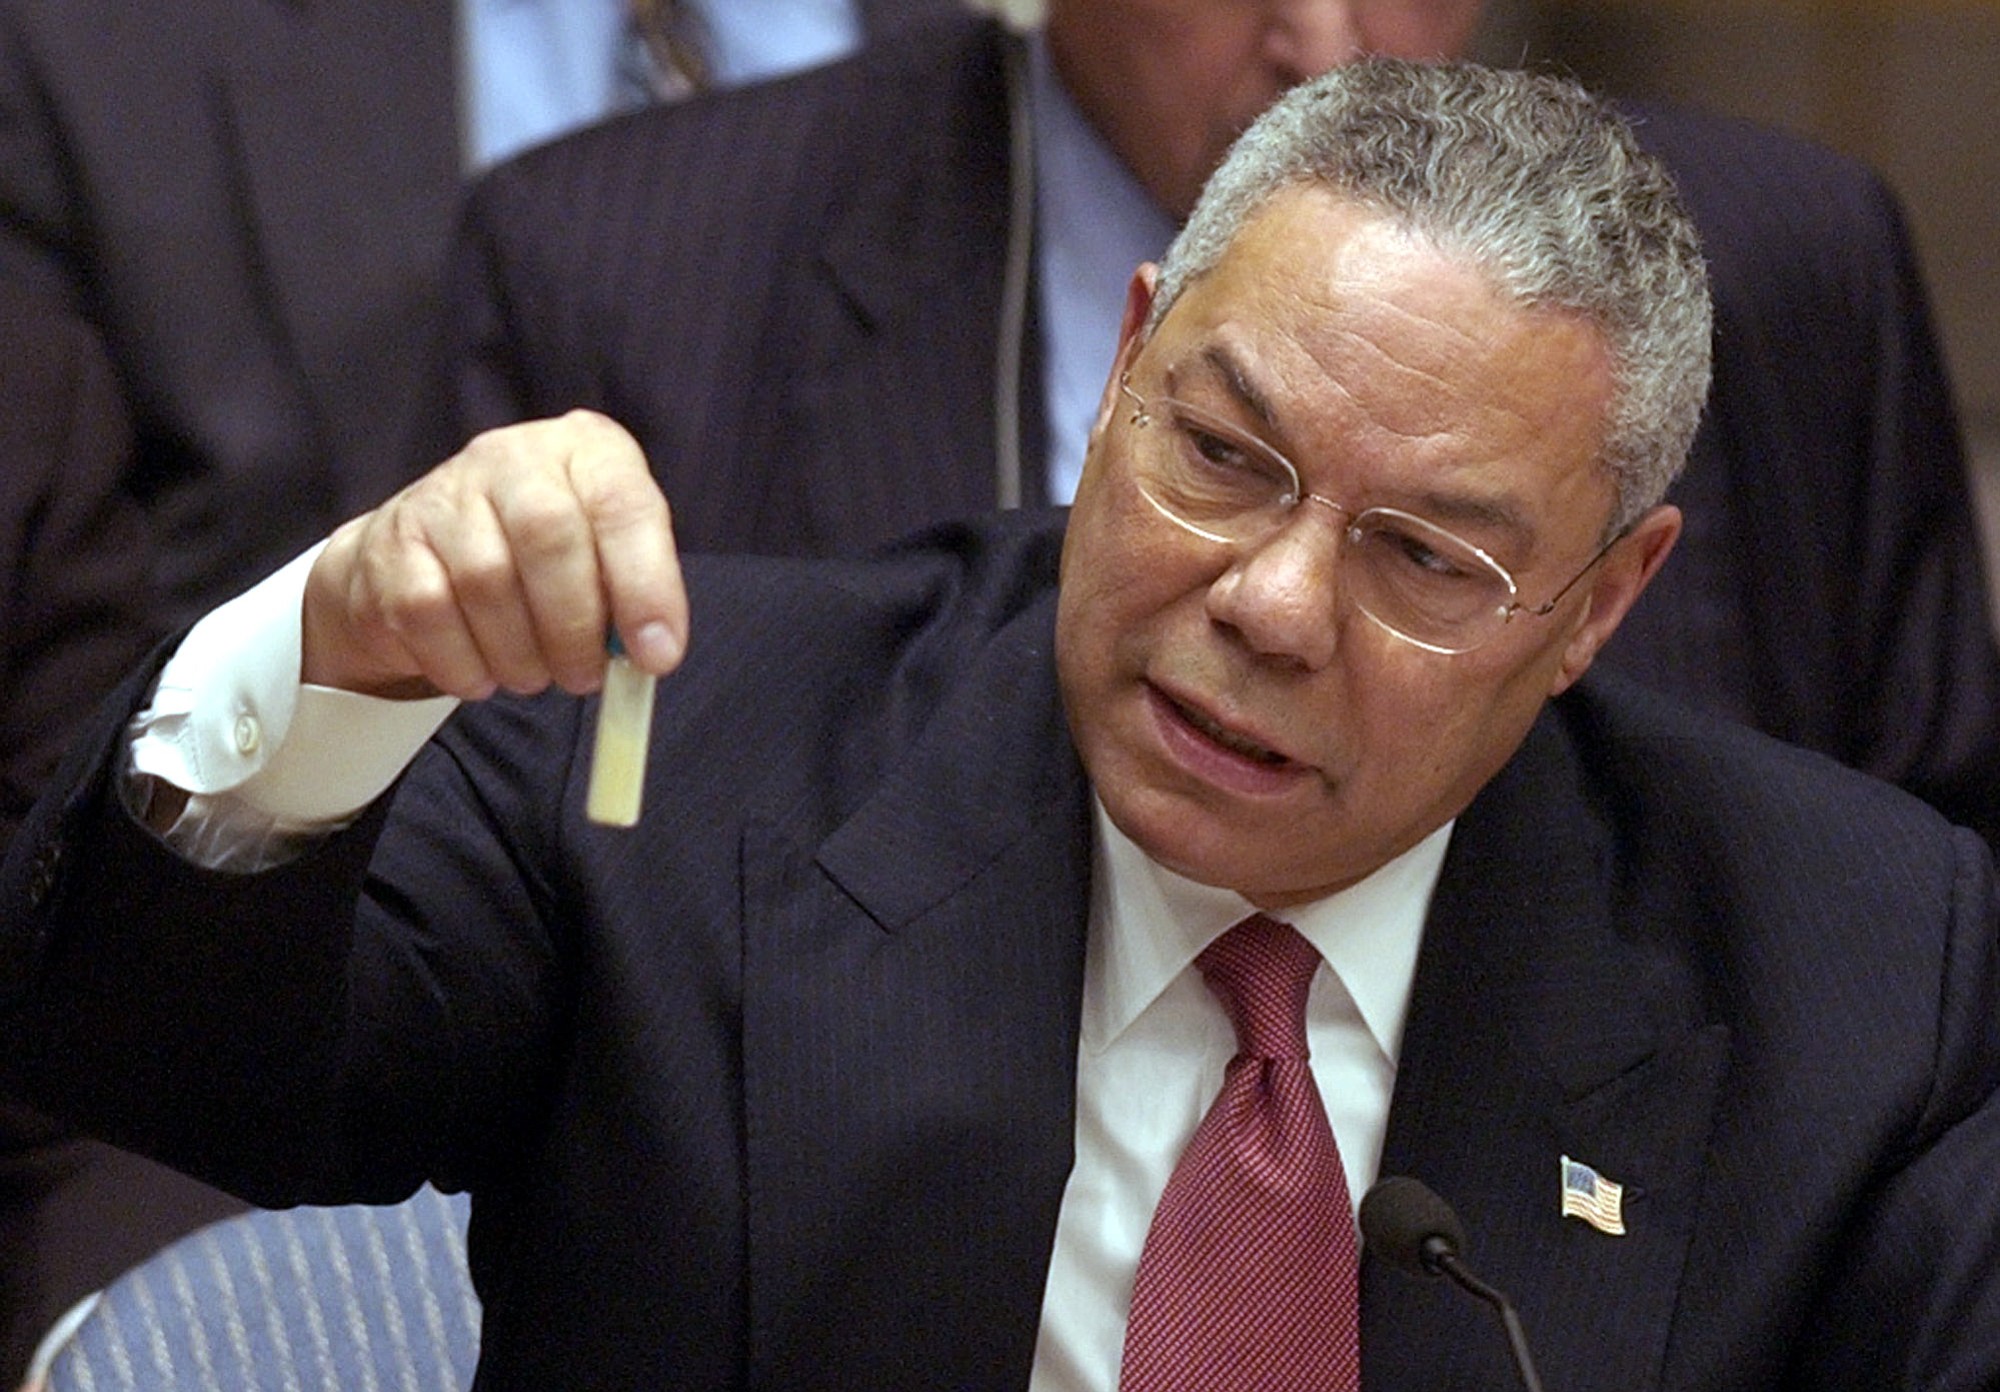 U.S. Secretary of State Colin Powell holds up a vial that he said could contain anthrax during a meeting of the United Nations Security Council at the United Nations headquarters on Feb.